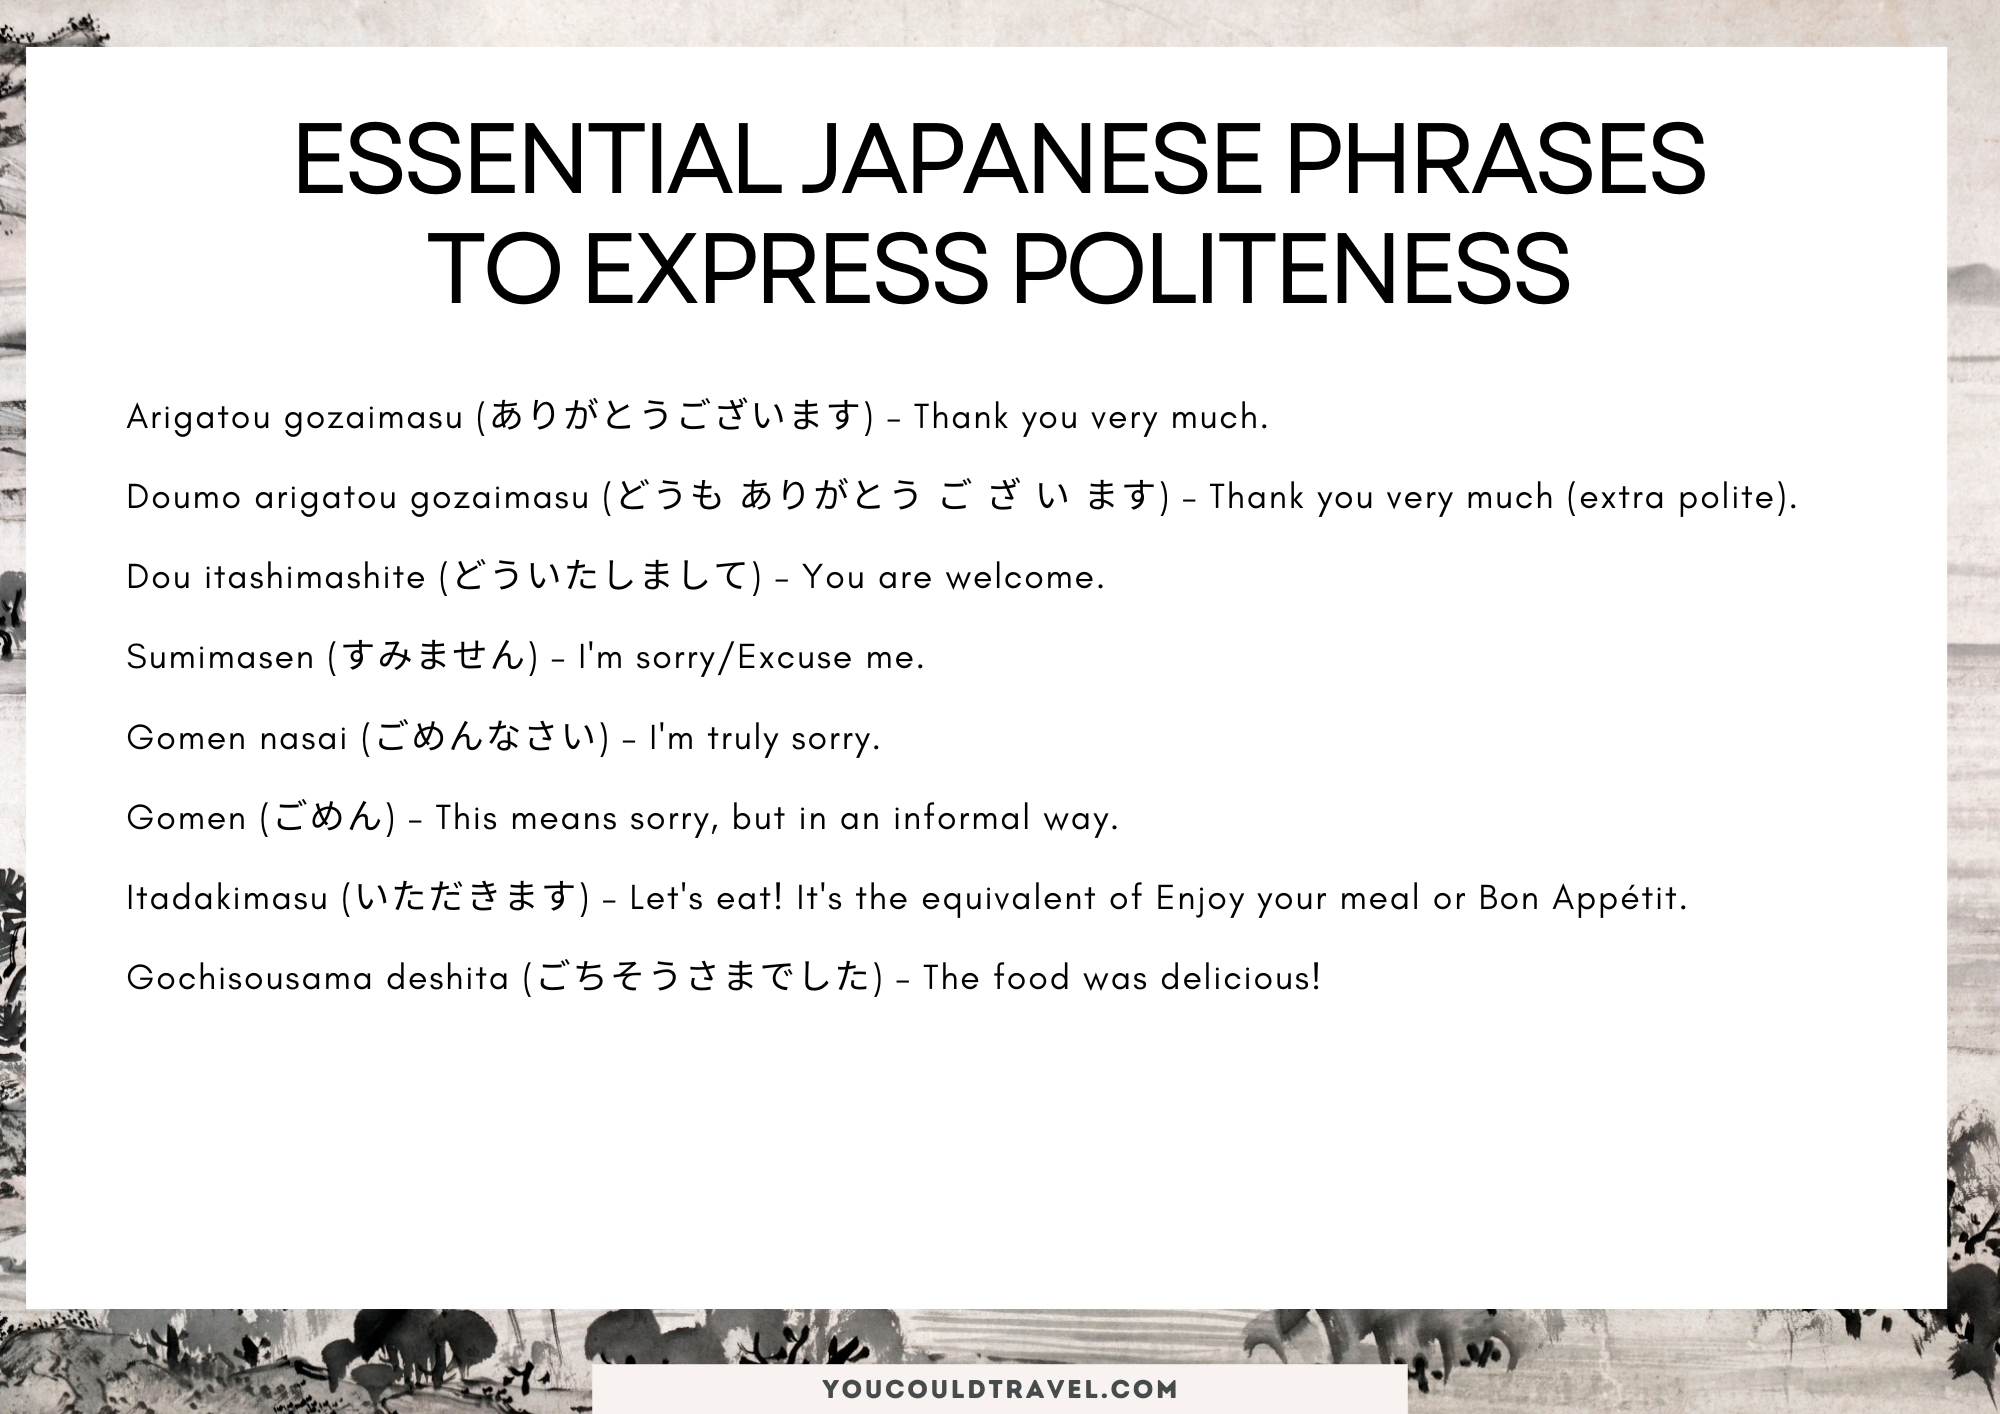 Essential Japanese phrases to express politeness